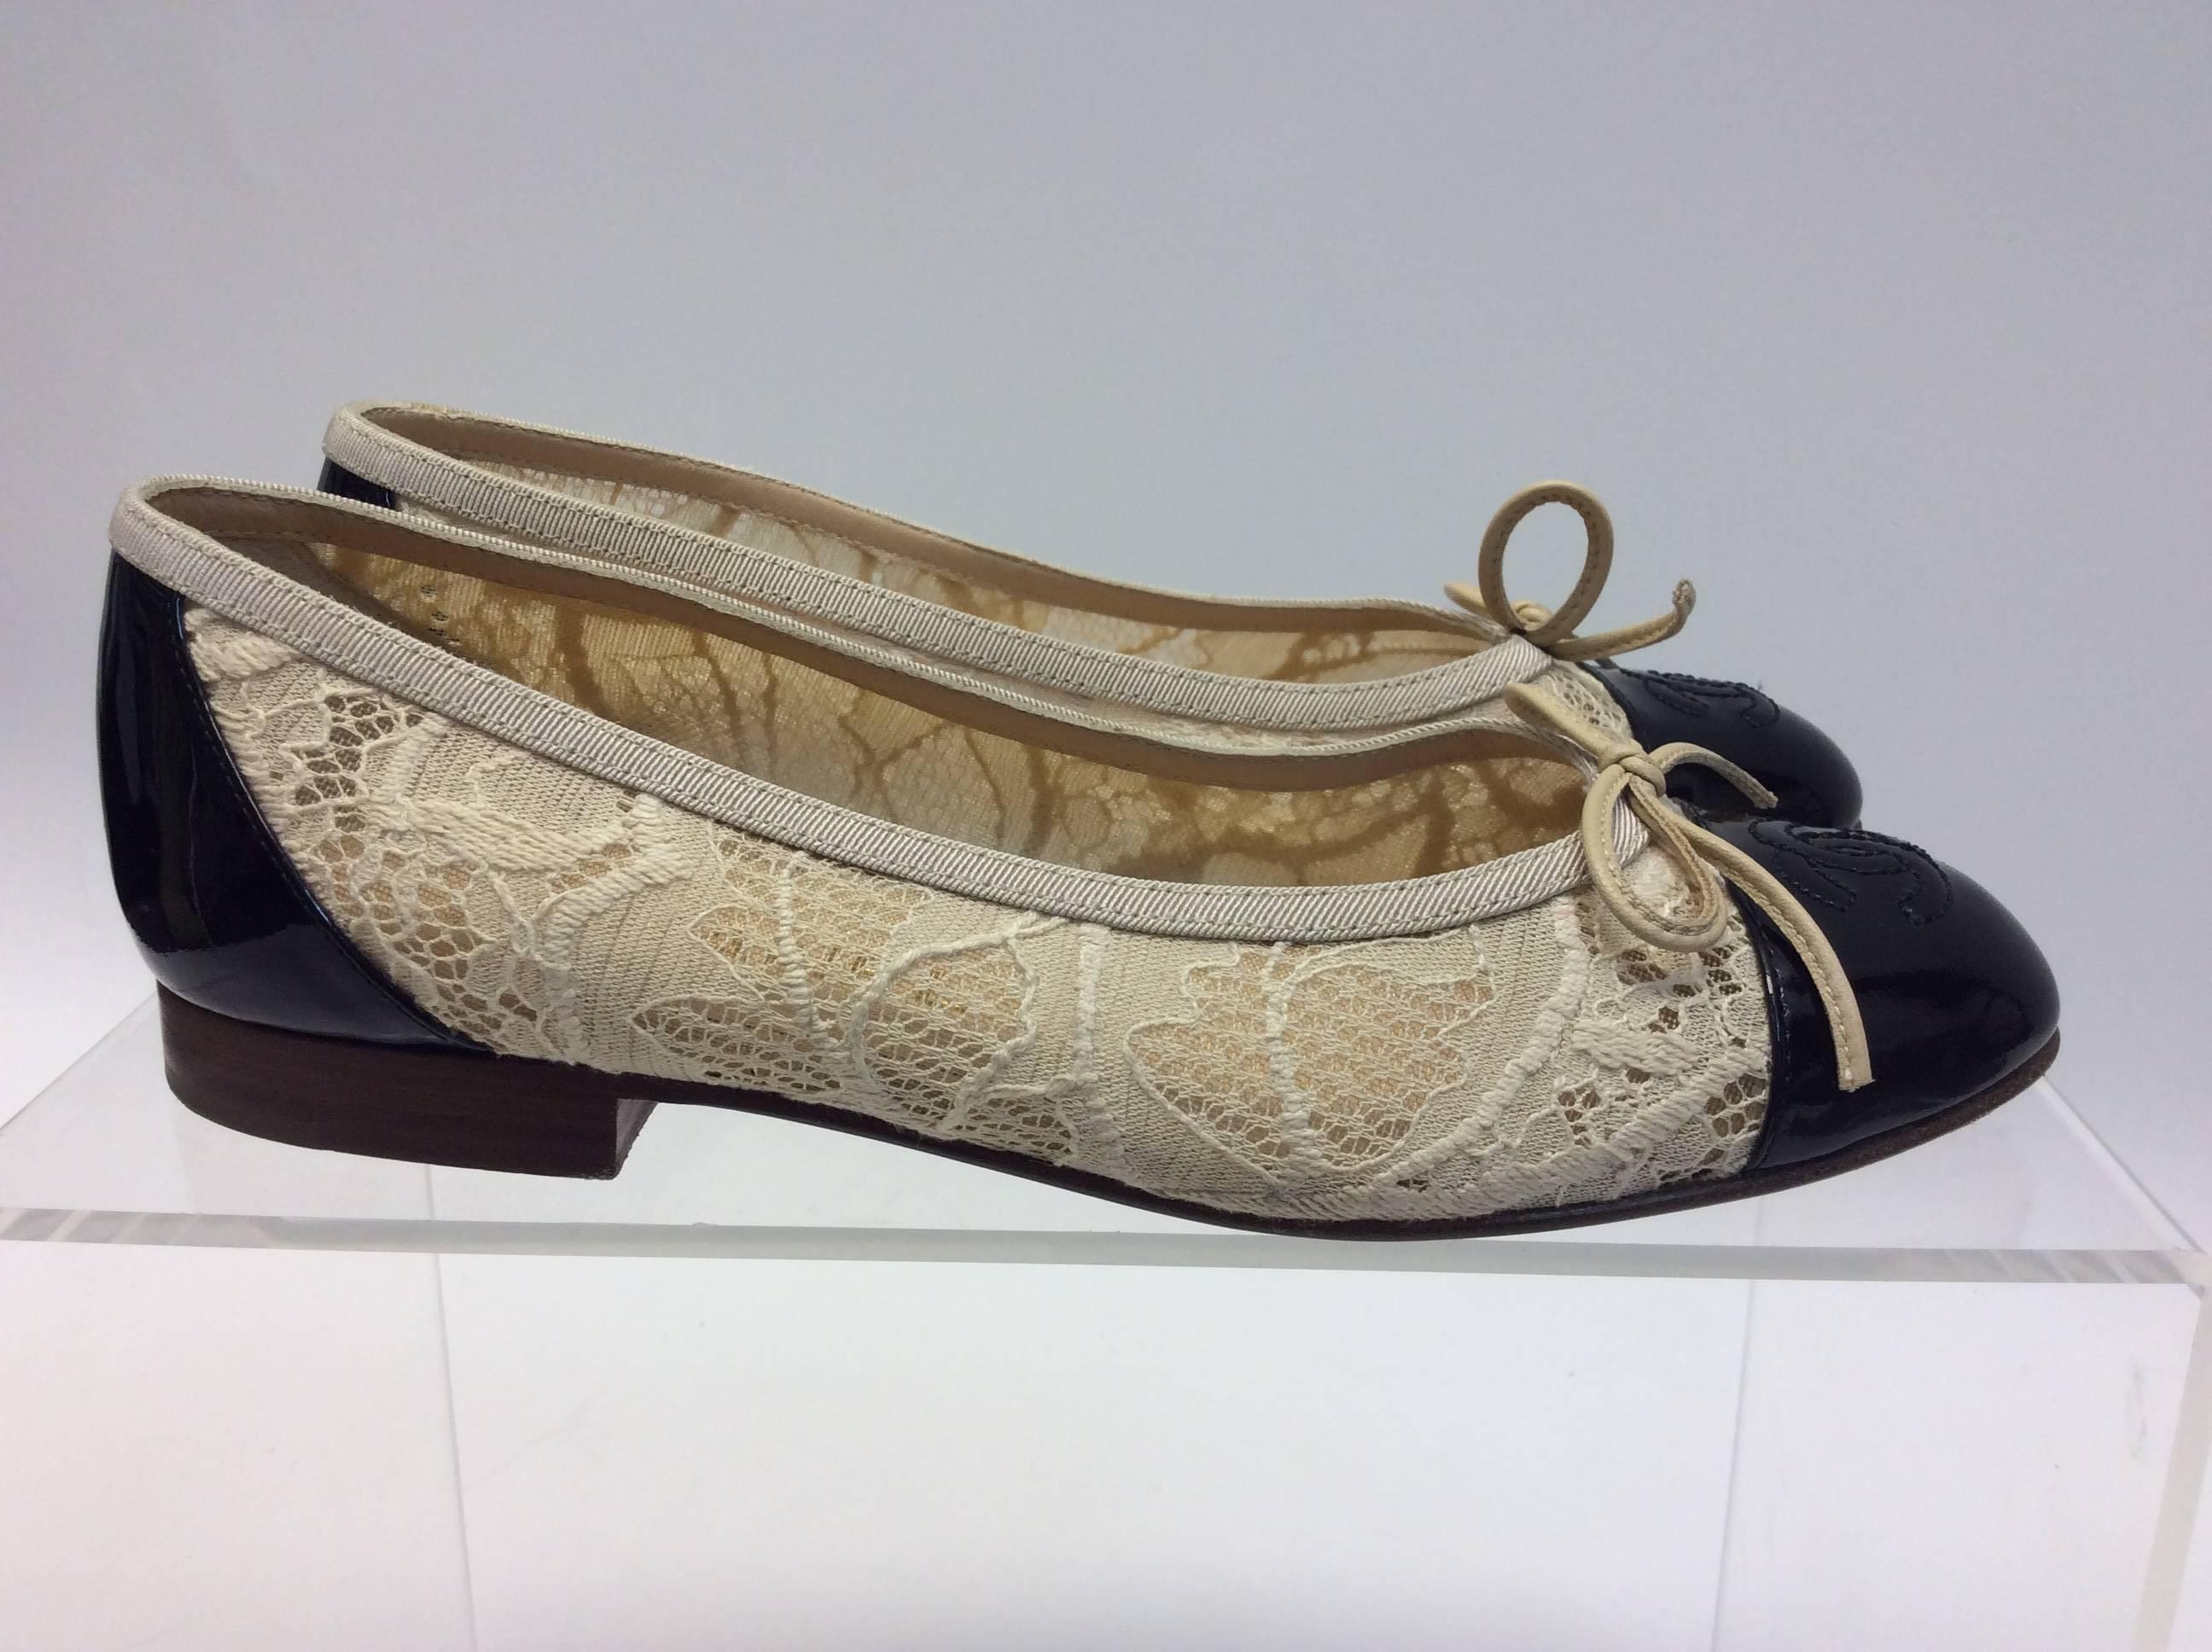 Chanel Cream Lace Flats In Excellent Condition For Sale In Narberth, PA